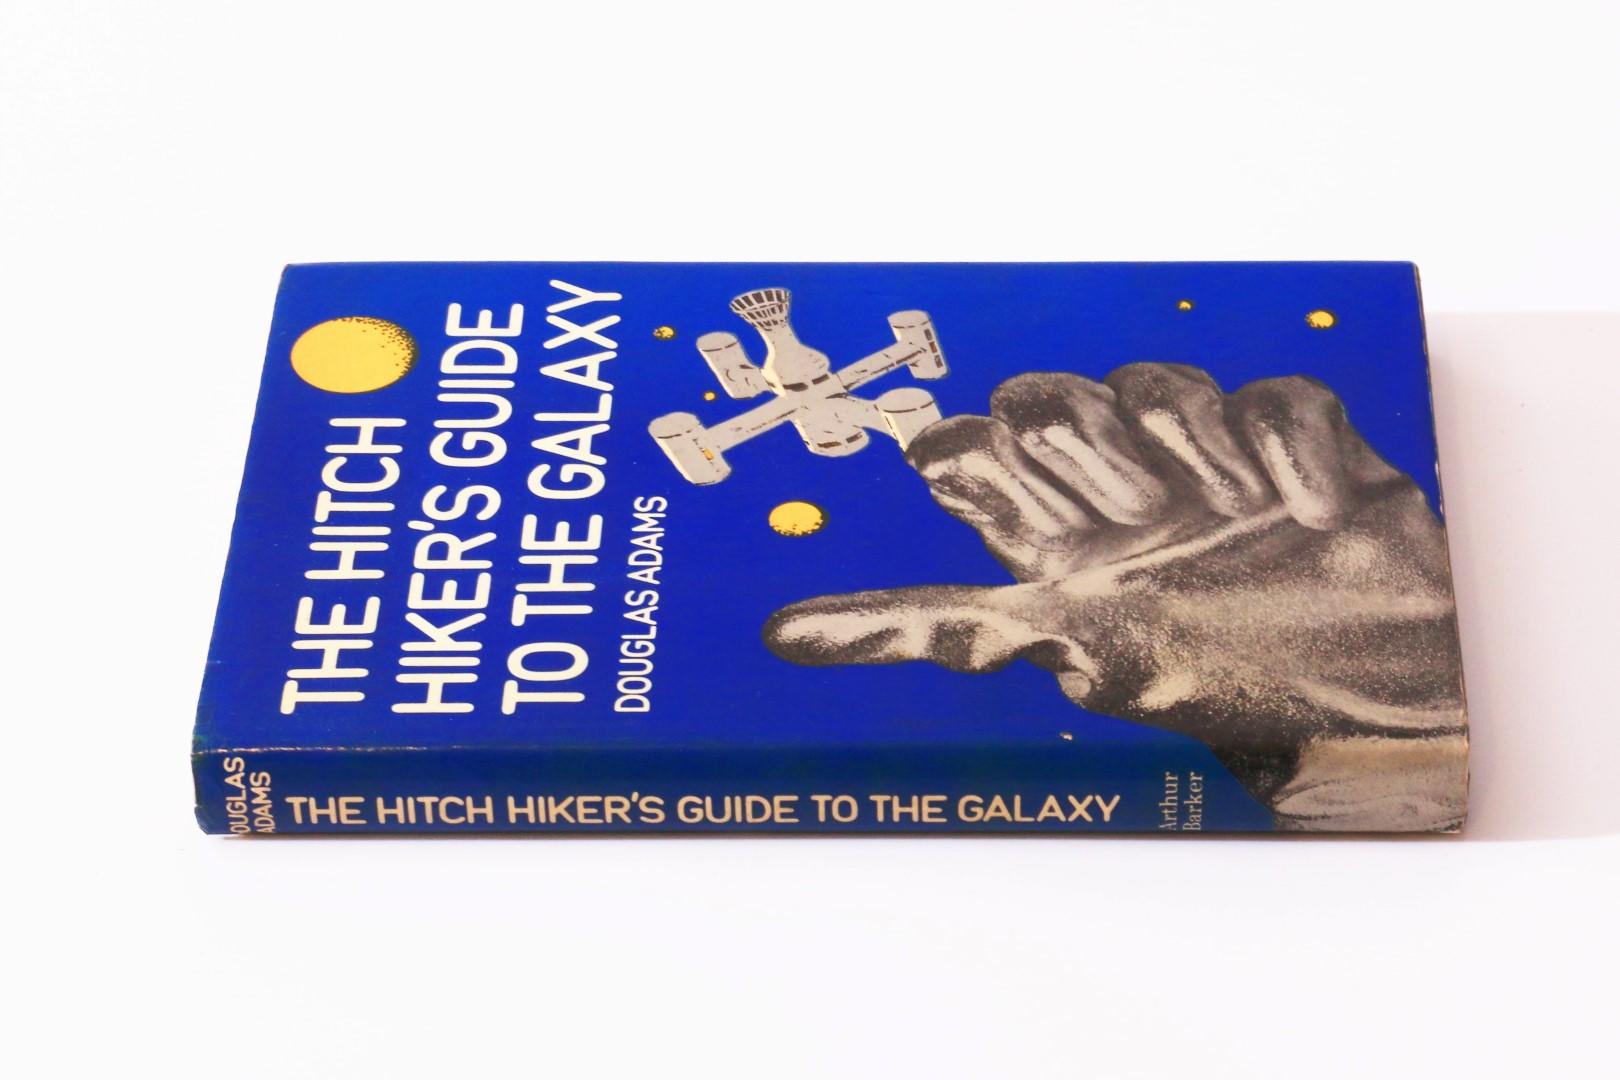 Douglas Adams - The Hitch Hiker's Guide to the Galaxy - Arthur Barker, 1979, First Edition.